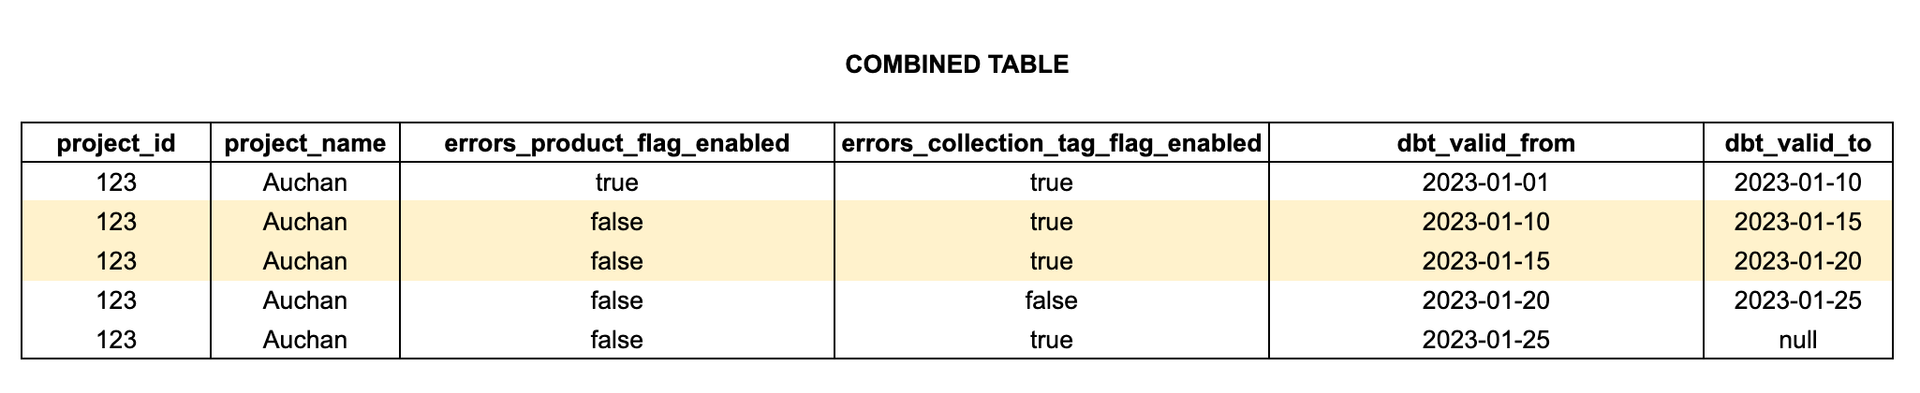 Combined tables with duplicates